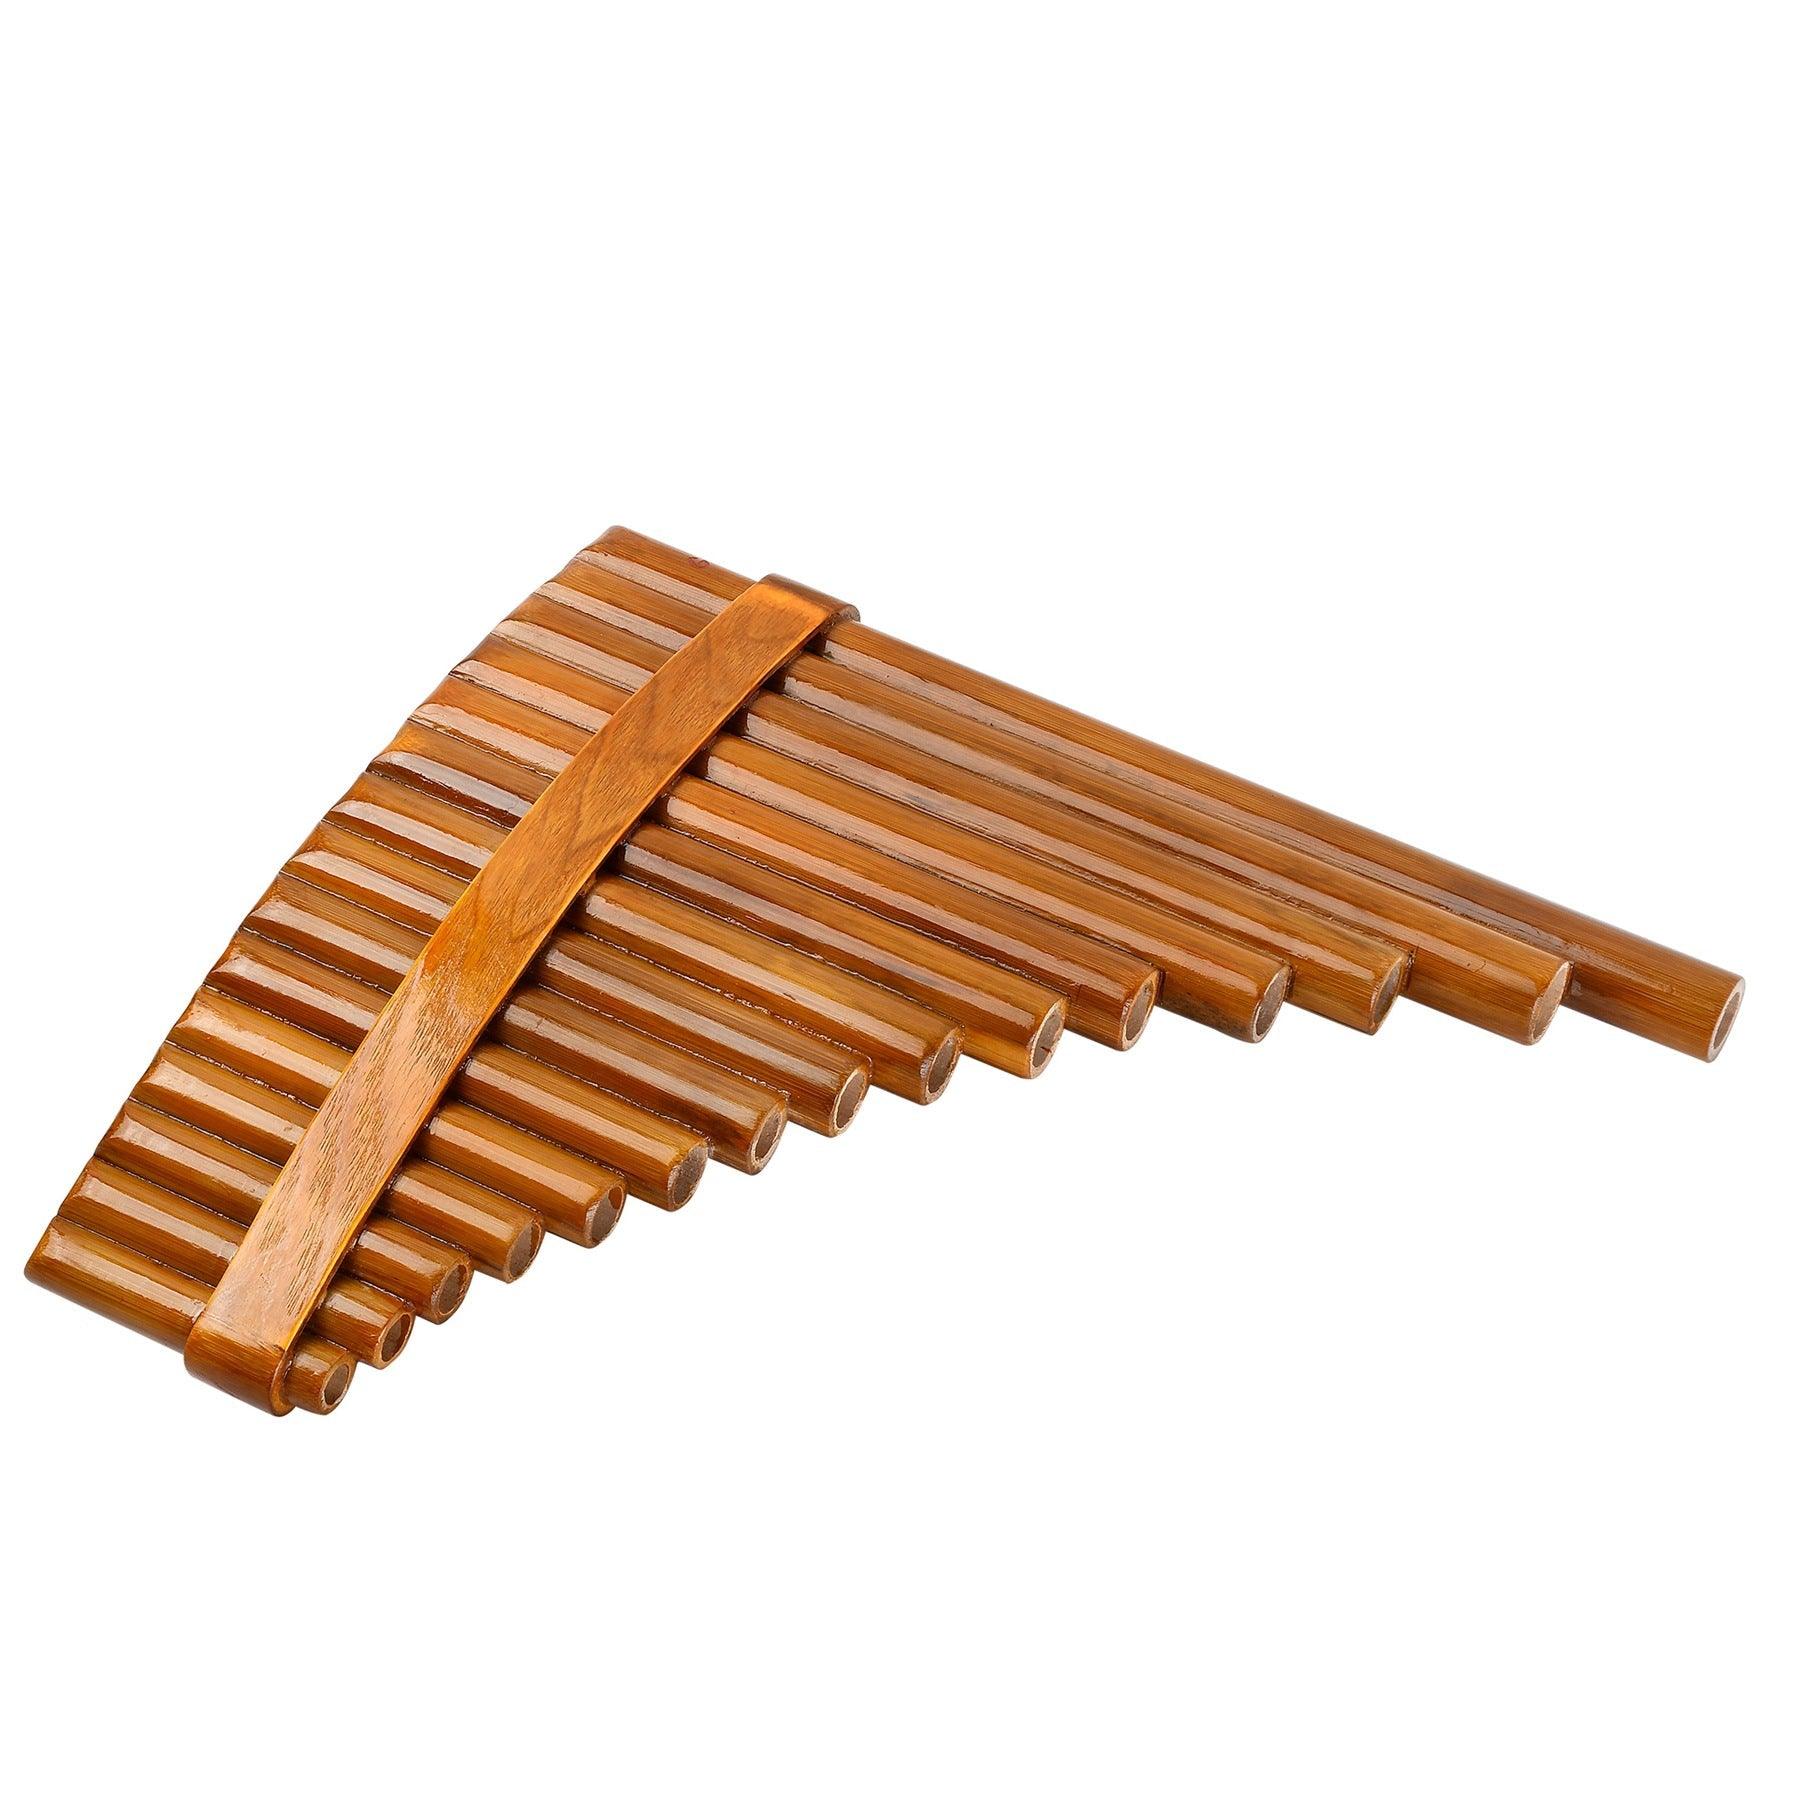 15 Pipes Pan Flute Upgraded G Key High Quality Bamboo PanPipes Chinese Traditional Woodwind Instrument - HLURU.SHOP